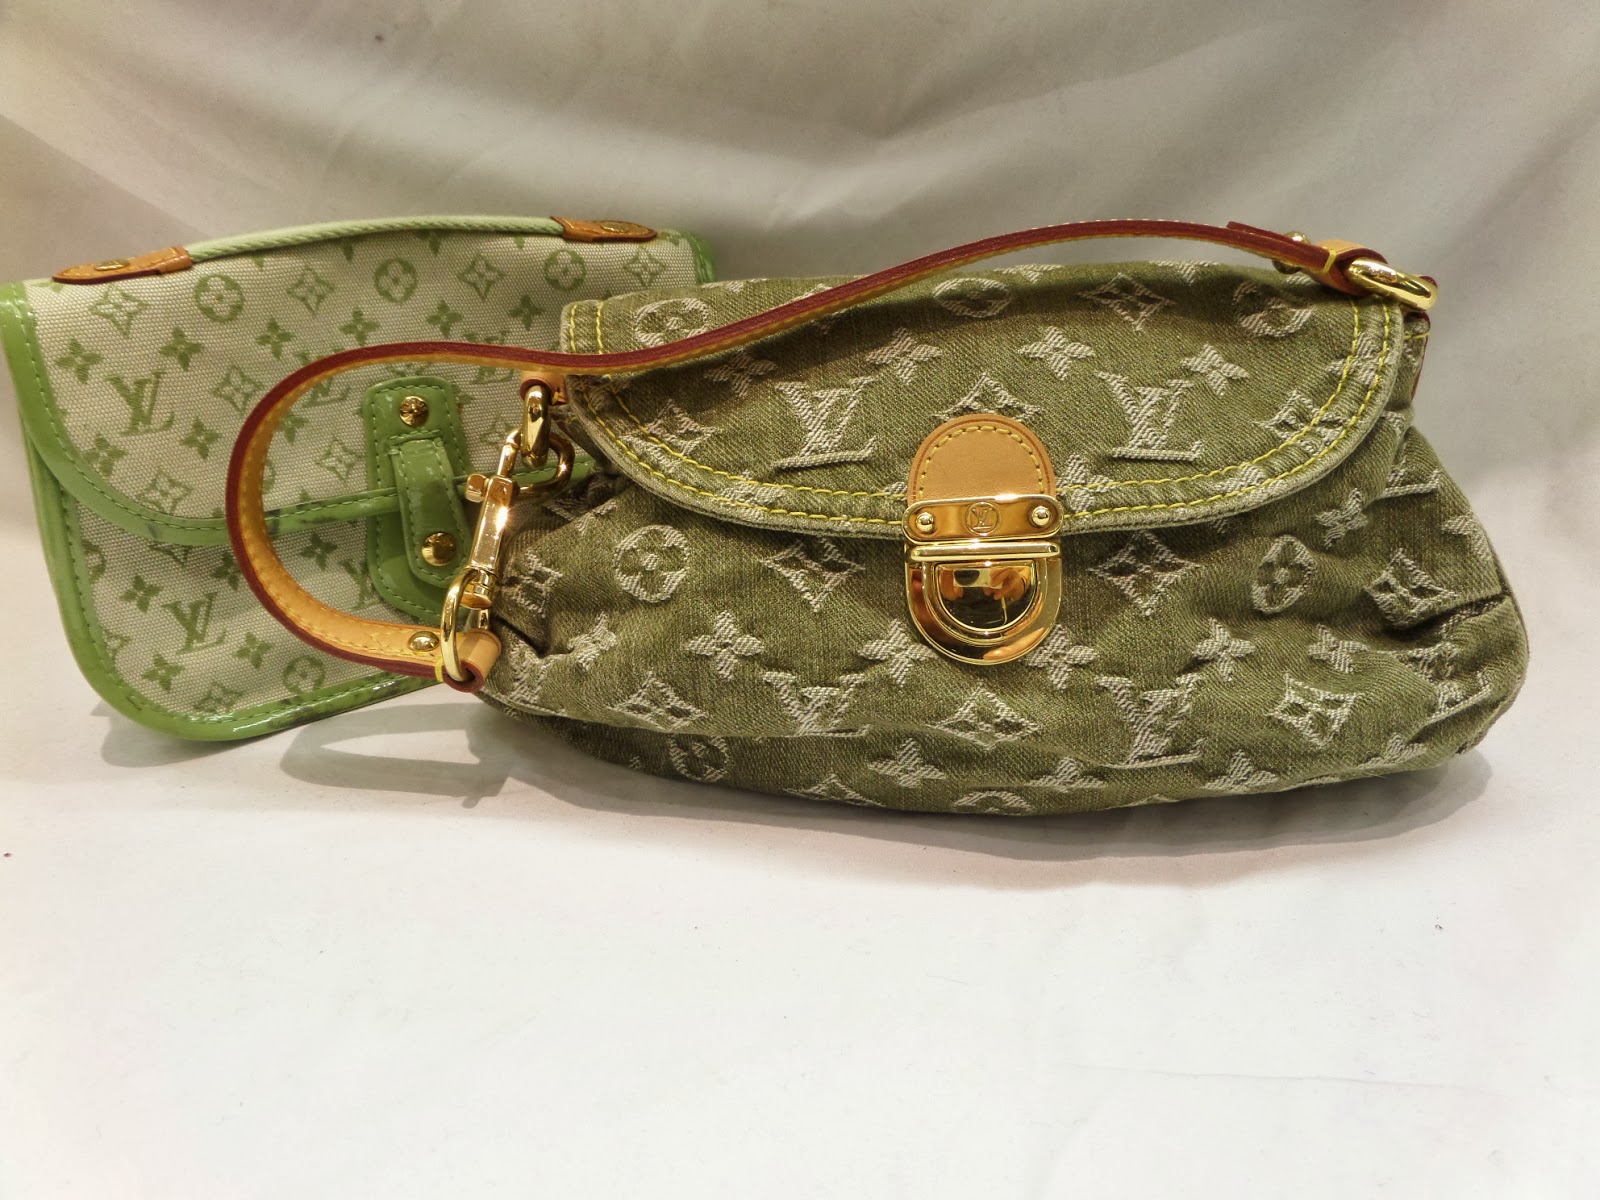 Consignment Shops That Sell Louis Vuitton | Confederated Tribes of the Umatilla Indian Reservation